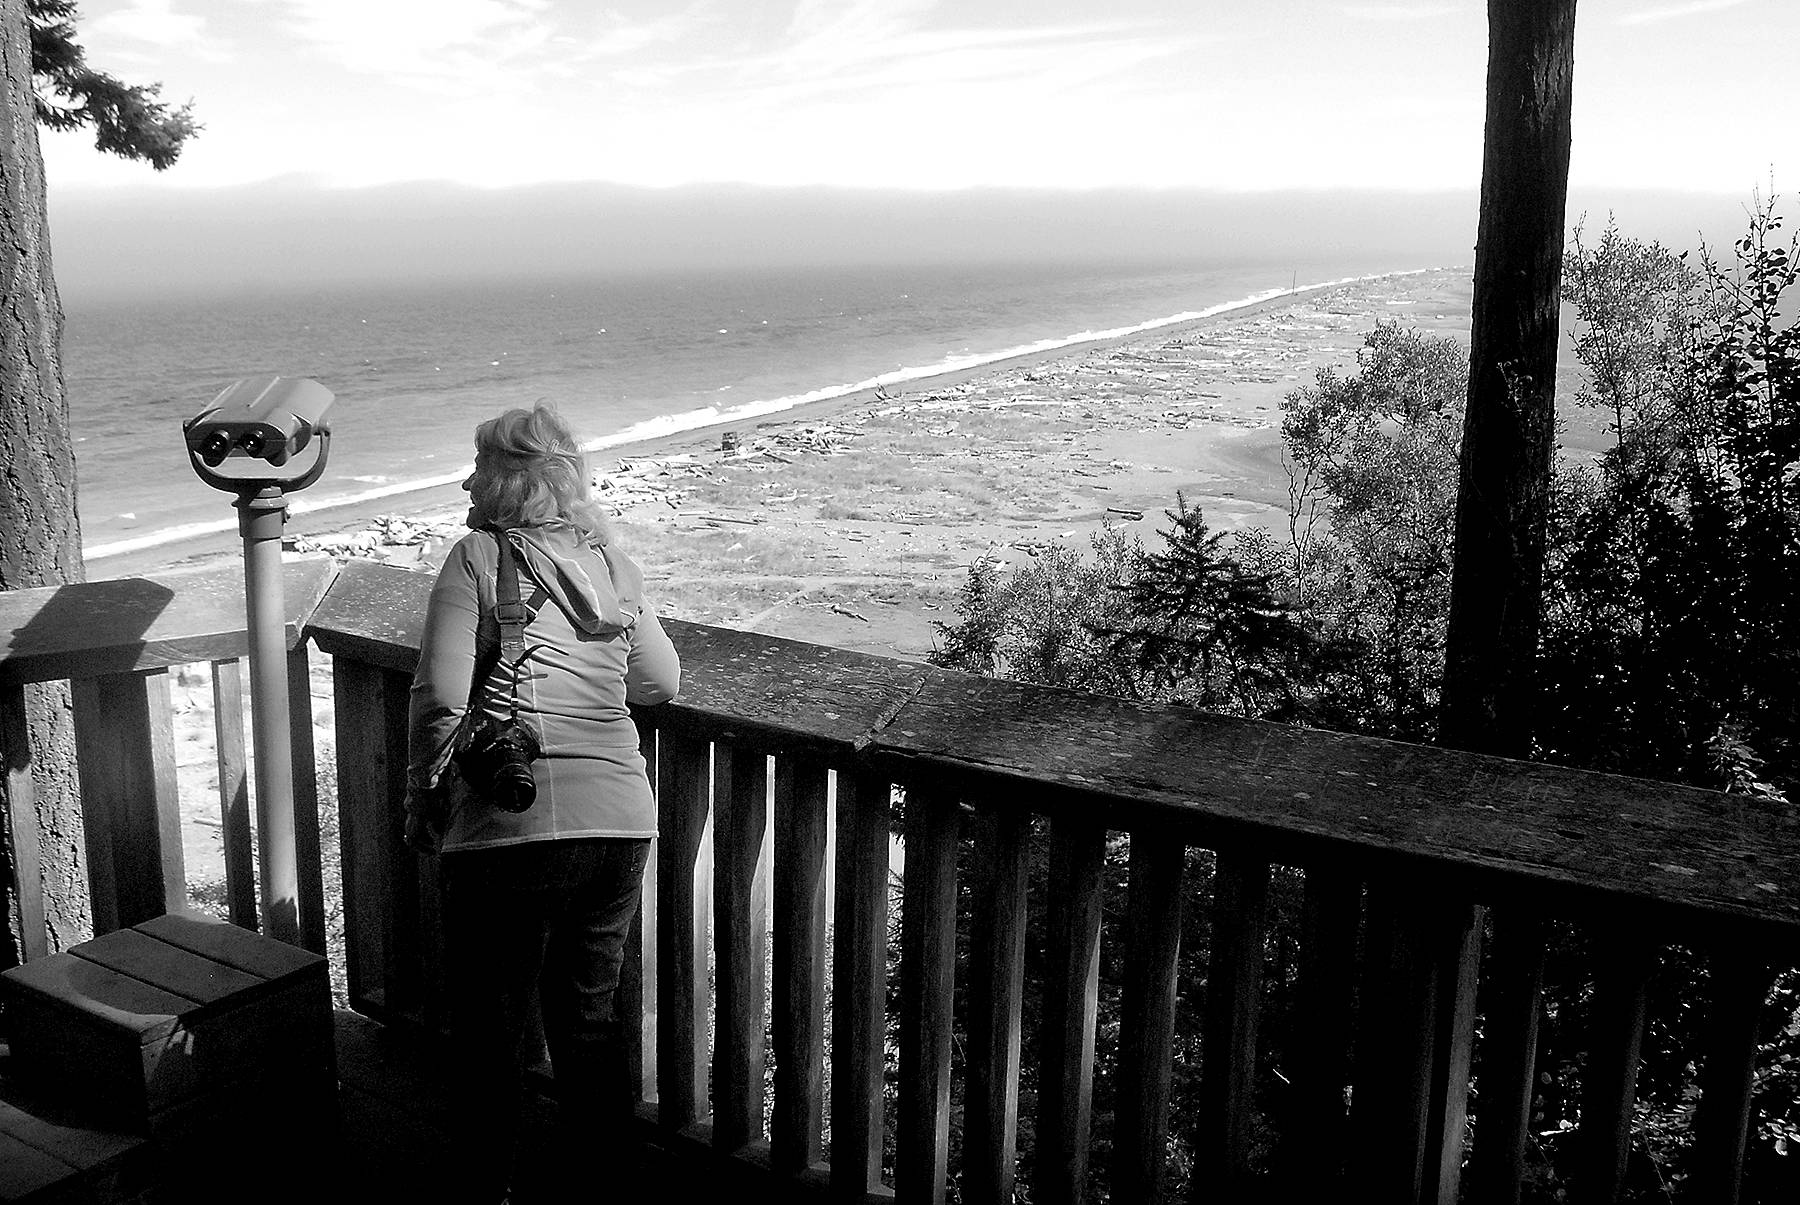 Keith Thorpe/Peninsula Daily News
Phyllis Millan of Wilsonville, Ore., admires the view on Dungeness Spit on Thursday from an overlook in the Dungeness National Wildlife Refuge north of Sequim. The refuge, home to a variety of birds and marine mammals, offers the access trail to hikers along the spit.